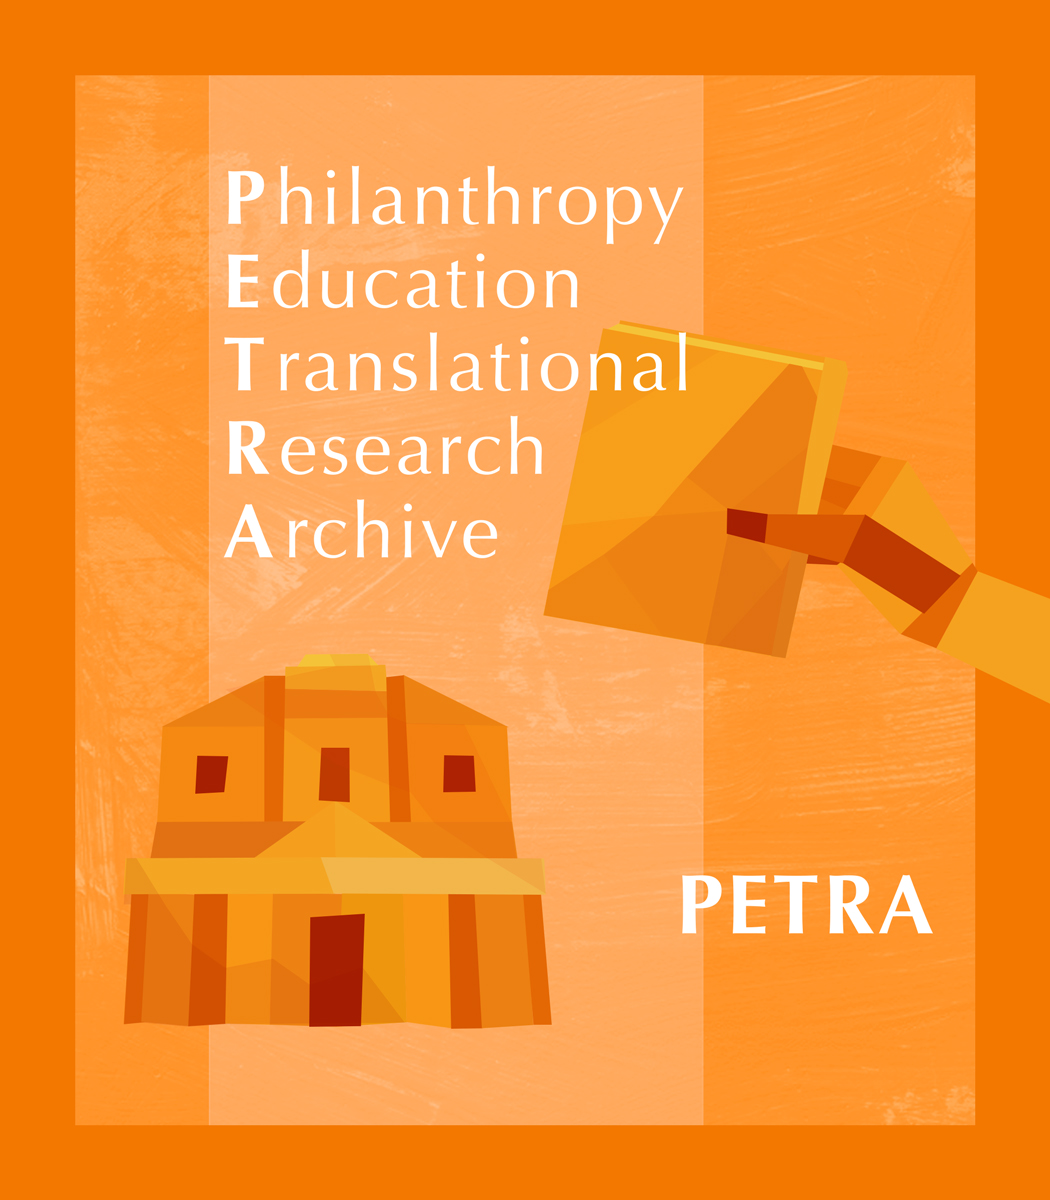 Philanthropy Education Translational Research Archive